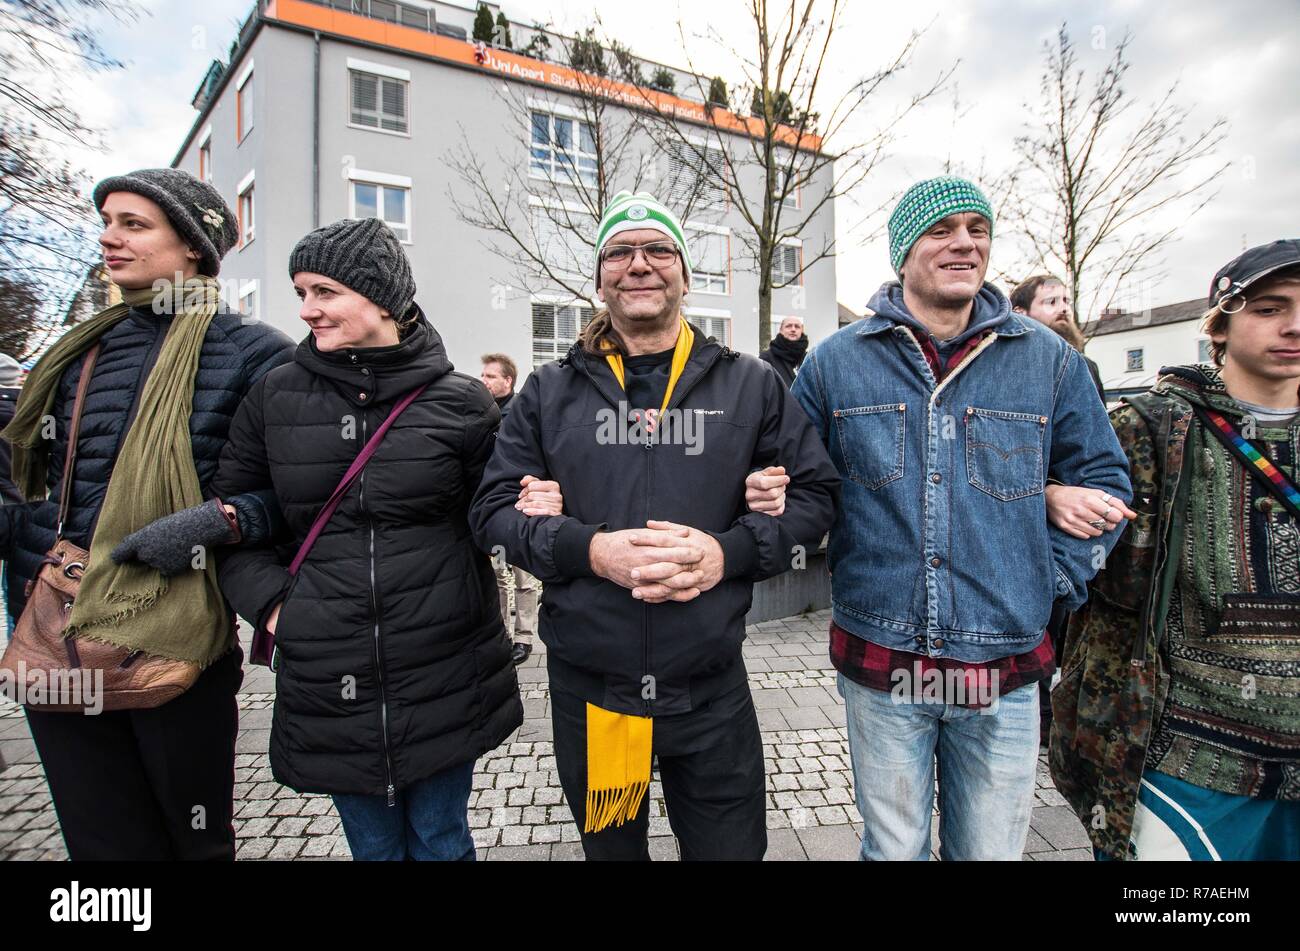 Munich, Bavaria, Germany. 8th December, 2018. Protestors against Pegida made a human chain. Pegida Dresden in Munich, the self-proclaimed original Pegida, organized a rally in the city's Milberthofen district in front of the Dankeskirche (Thanks Church) of Munich. Headed by Michael Stuerzenberger, the group rallied against the United Nations Migration Pact. Speaking with Stuerzenberger was Gernot Tegetmeyer fro Credit Credit: ZUMA Press, Inc./Alamy Live News Stock Photo